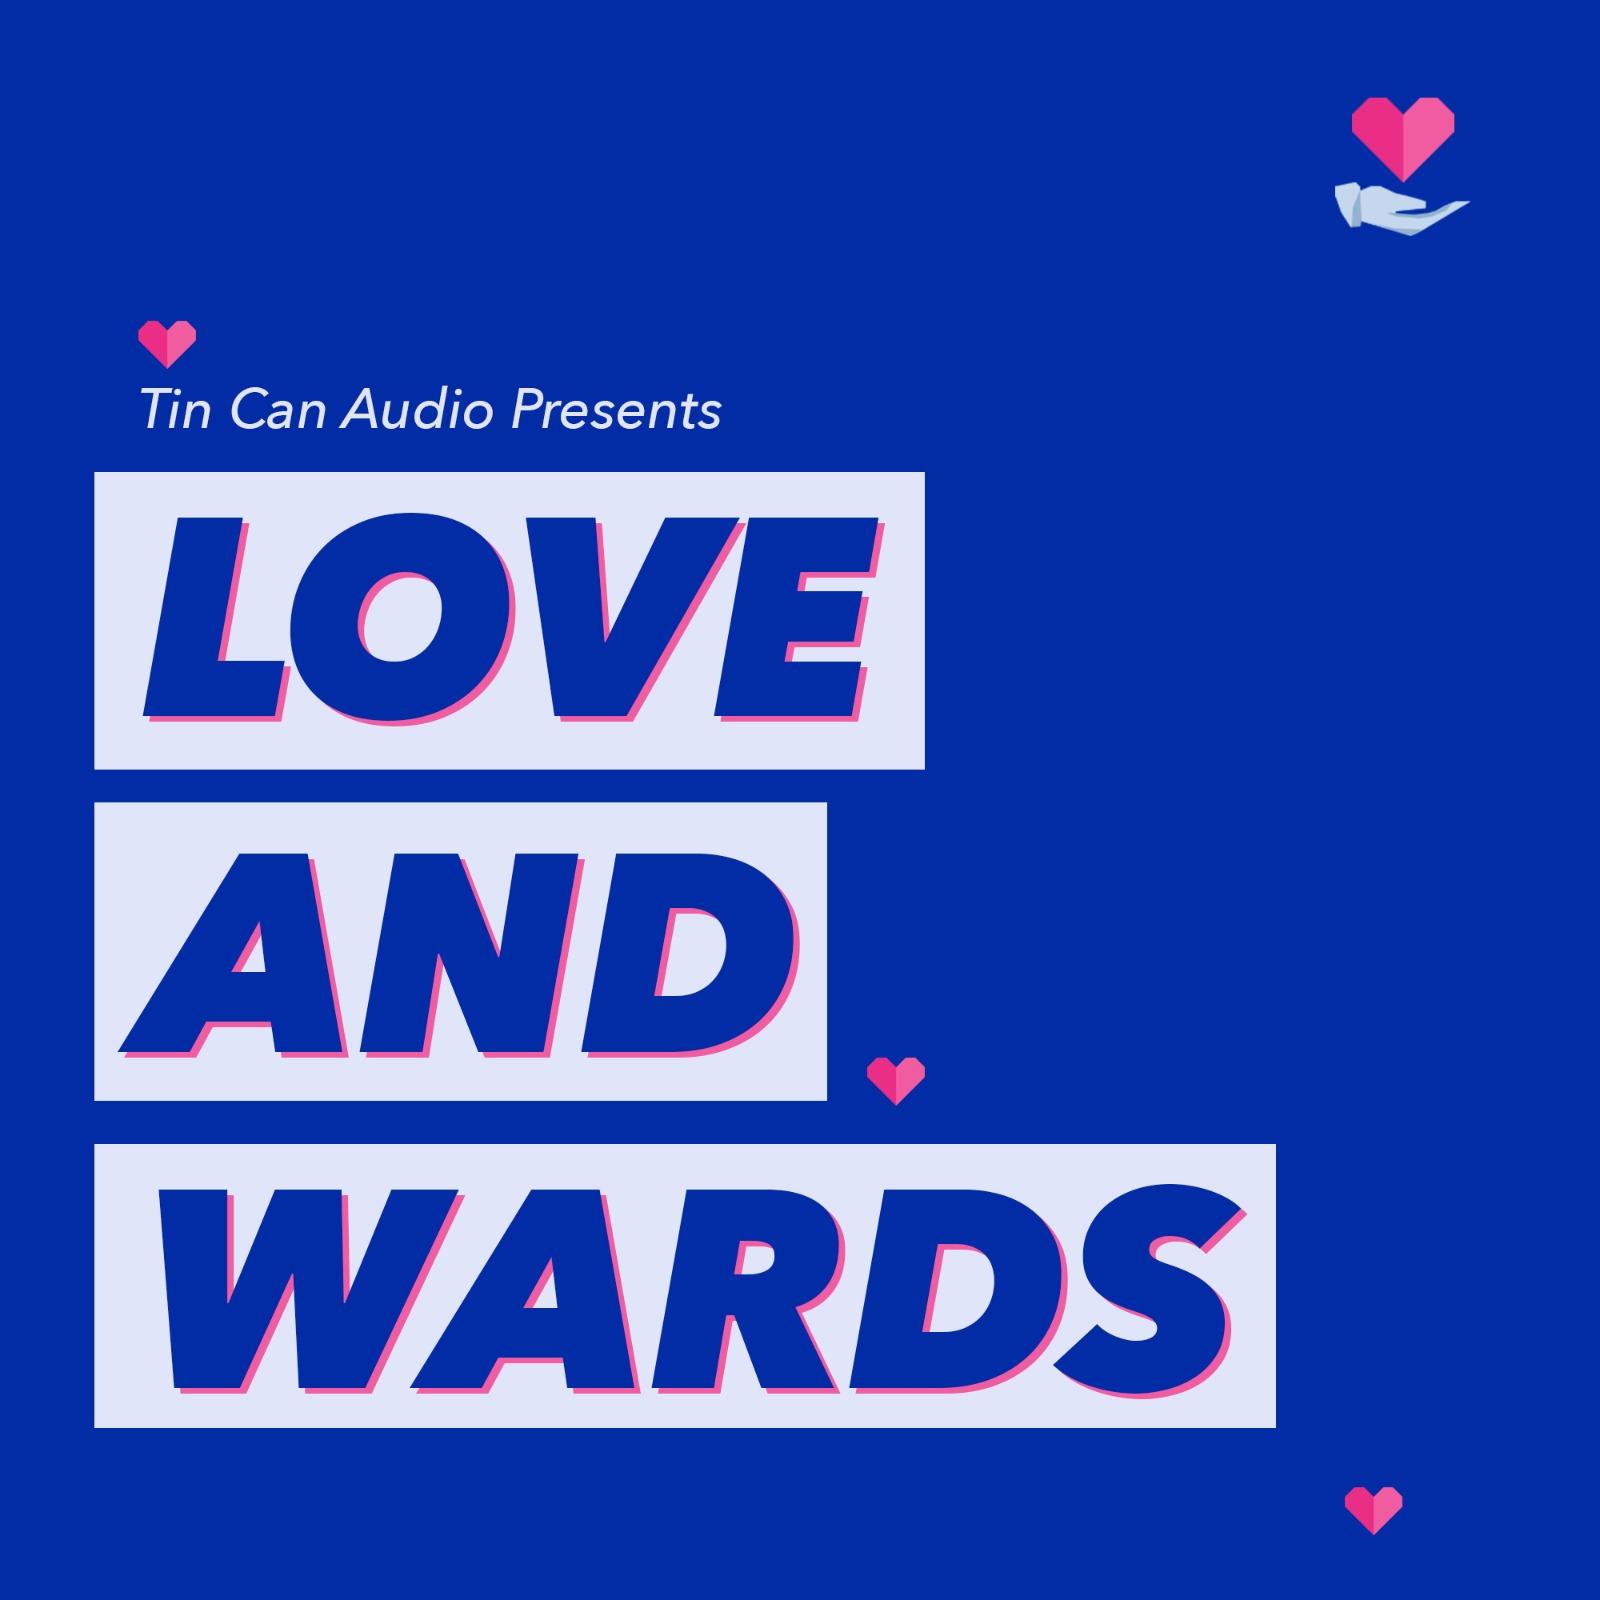 OUR NEW SHOW - 'Love & Wards: Conversations With My Parents'